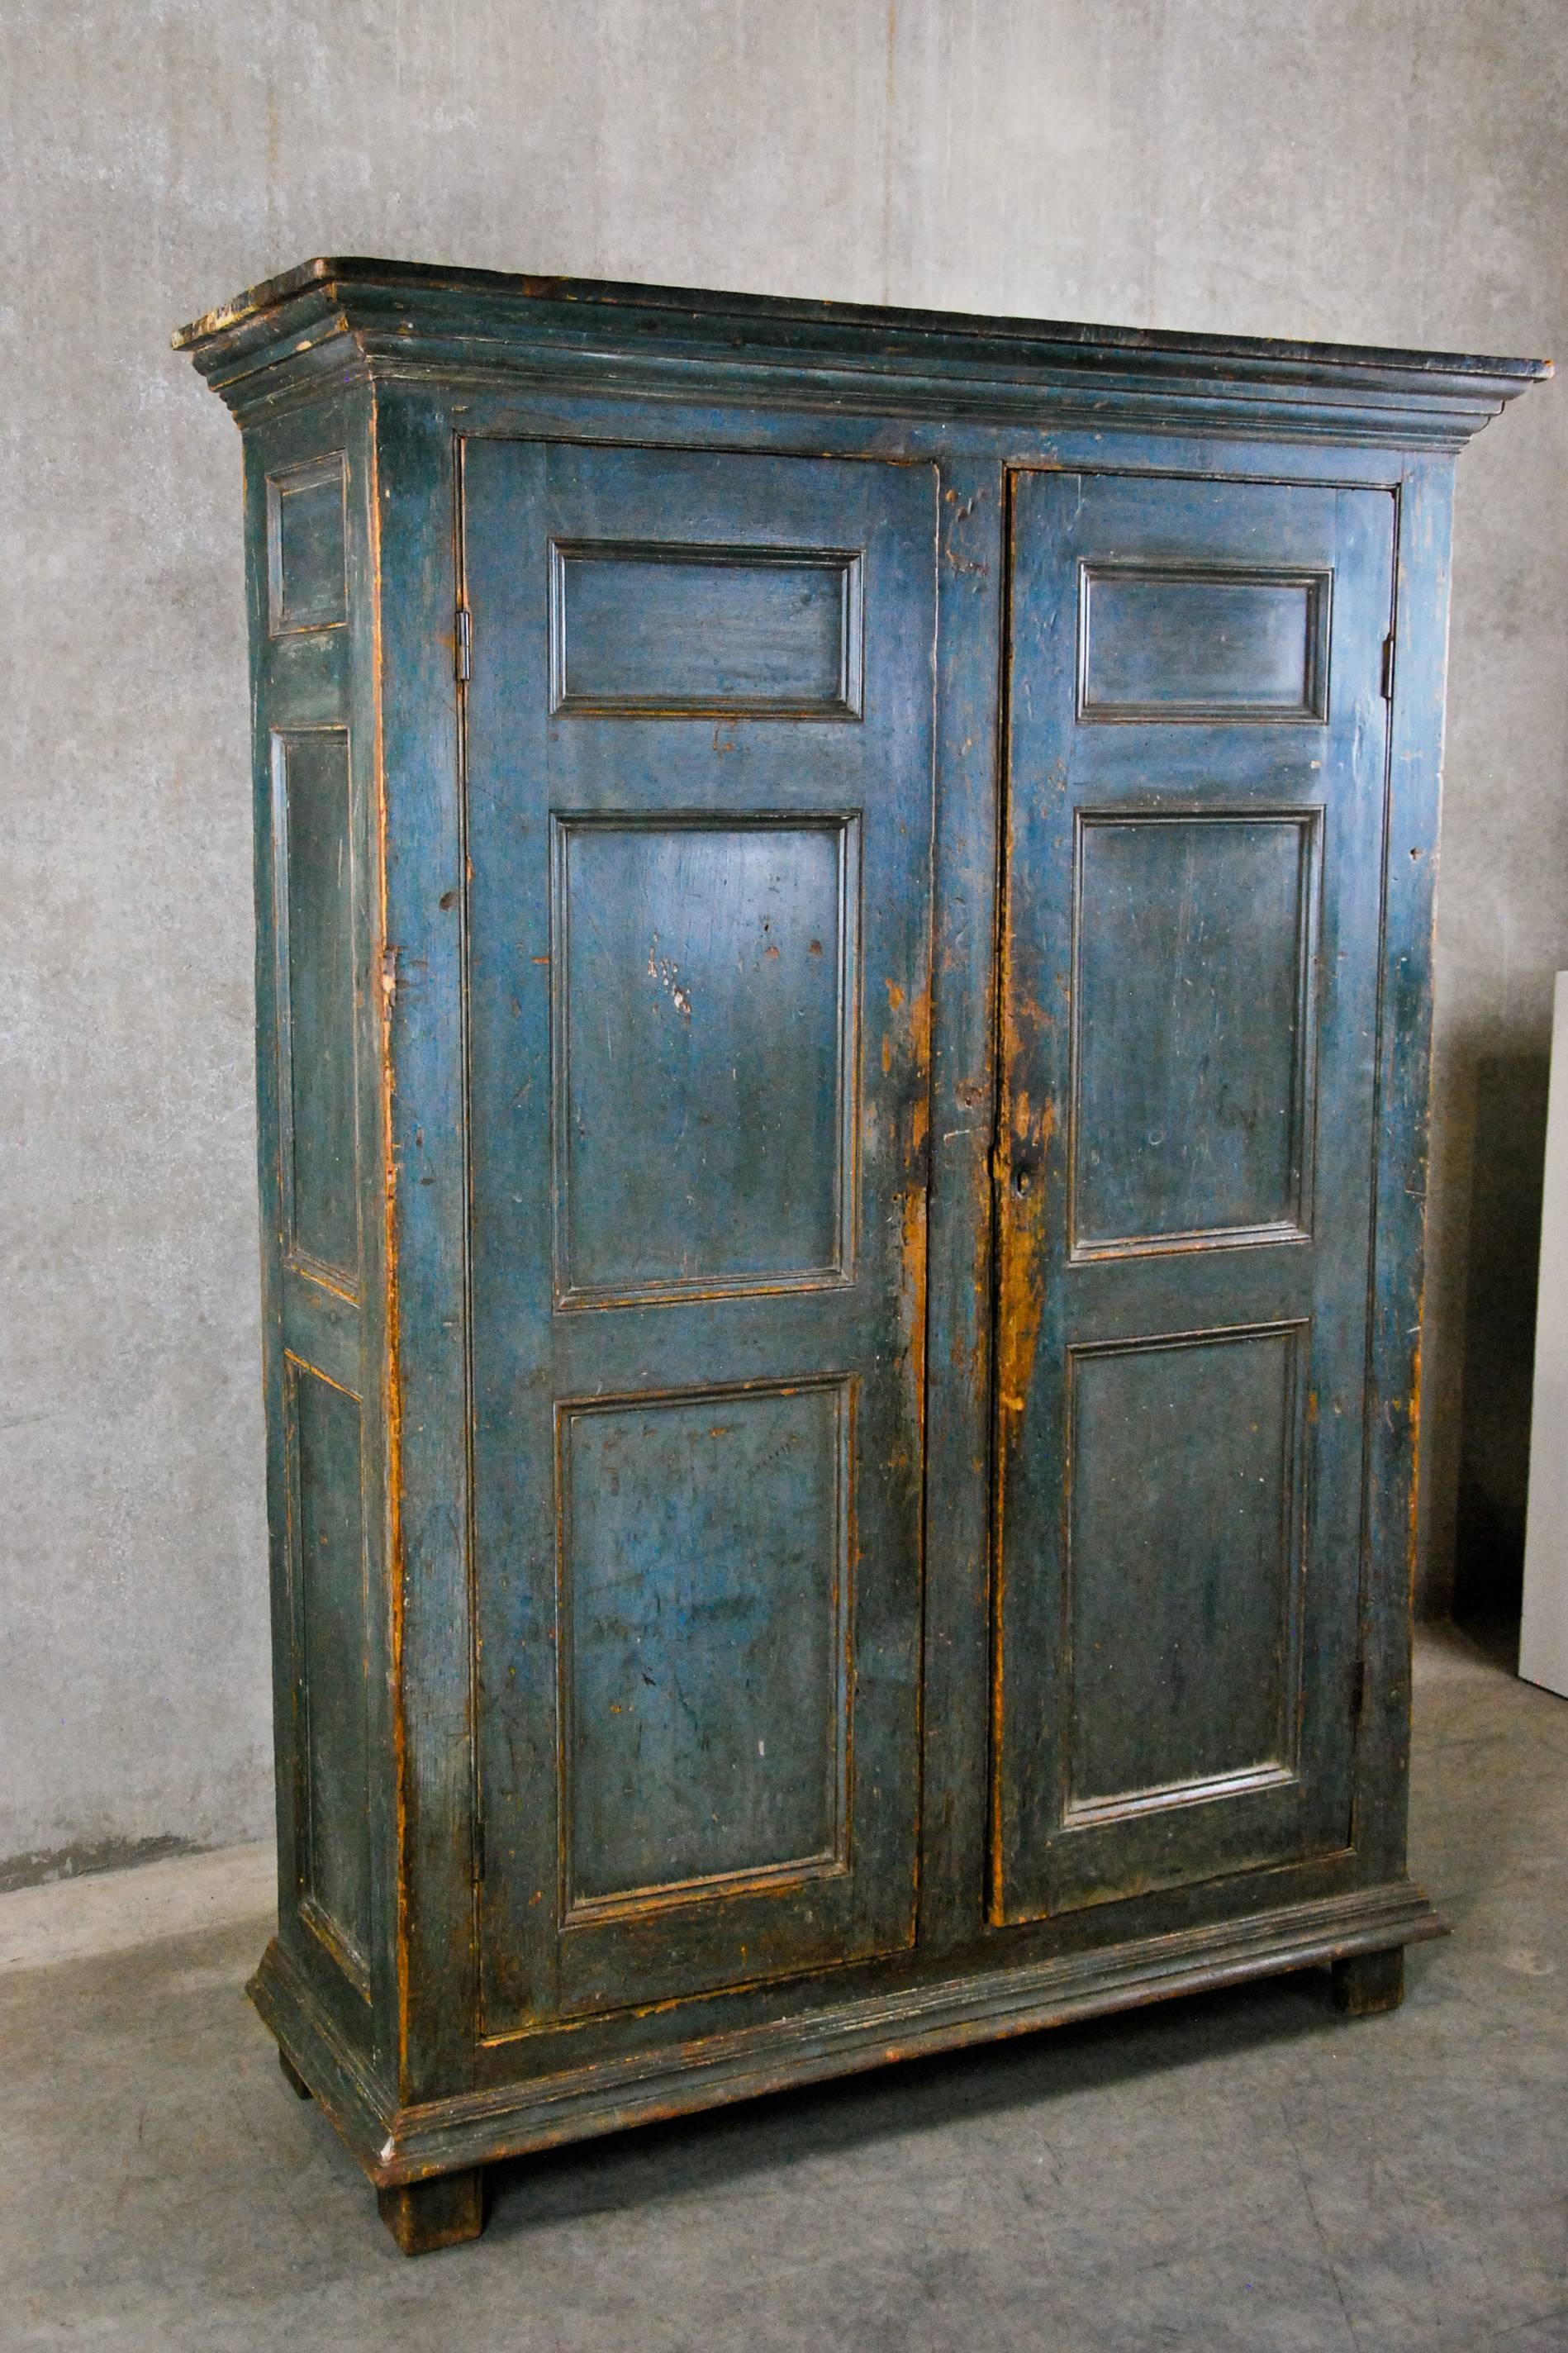 A rare untouched Quebec armoire in old surface. This polychrome finish is an oxidized grey/blue over blue. The shelves are original and are clean inside.
This piece has a working key to lock the cabinet. Found recently in Quebec.
Canadian at its